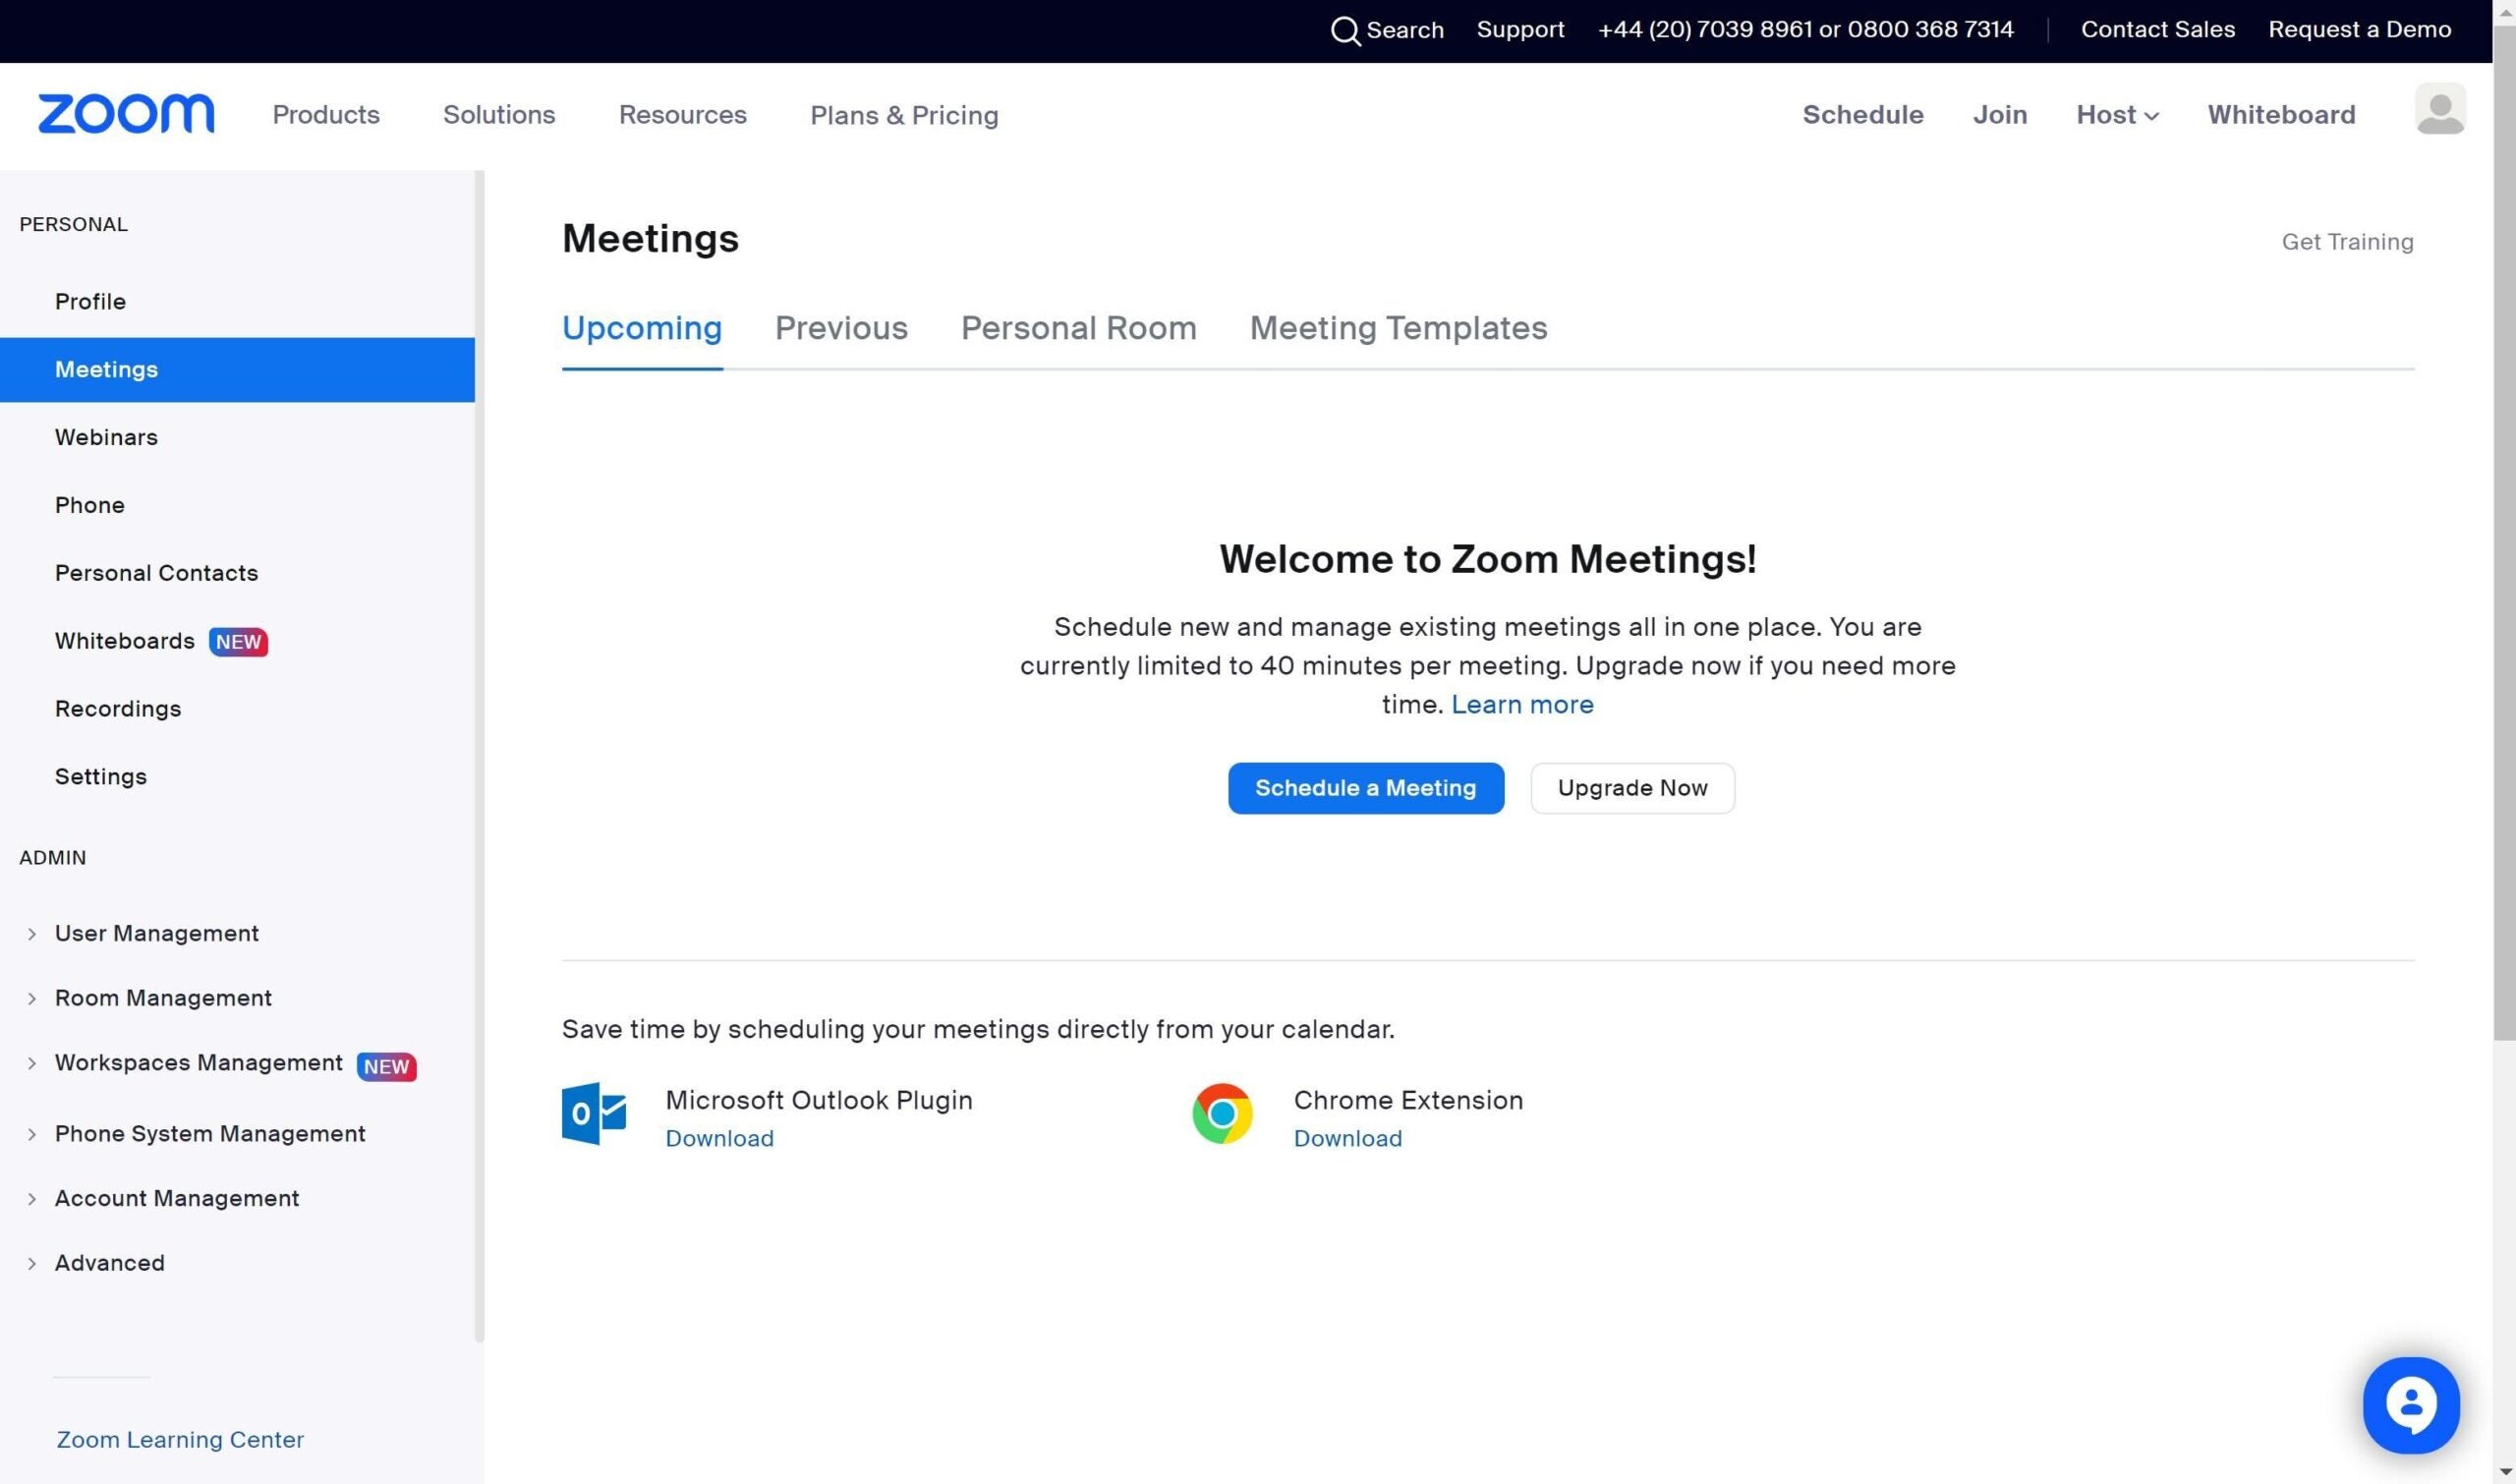 Plan a meeting in Zoom